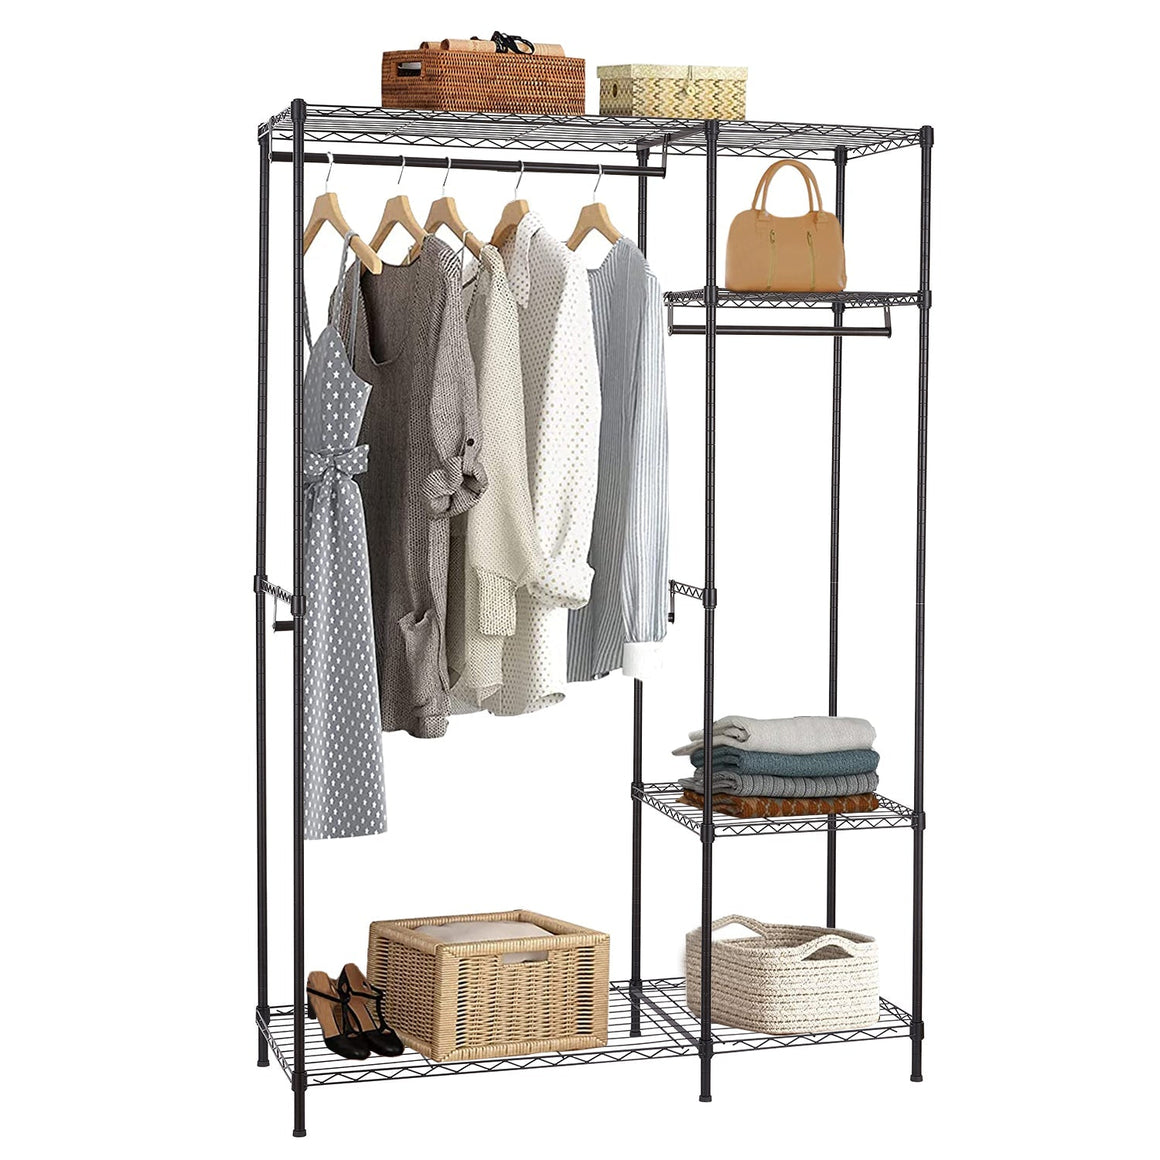 uhomepro Heavy Duty Garment Rack, Metal Adjustable Clothing Rack with Hanging Rod and Wire Shelving, Clothing Storage Organizer for Bedroom Laundry Room, 44.96" L x 14.6" W x 70.86" H, Black